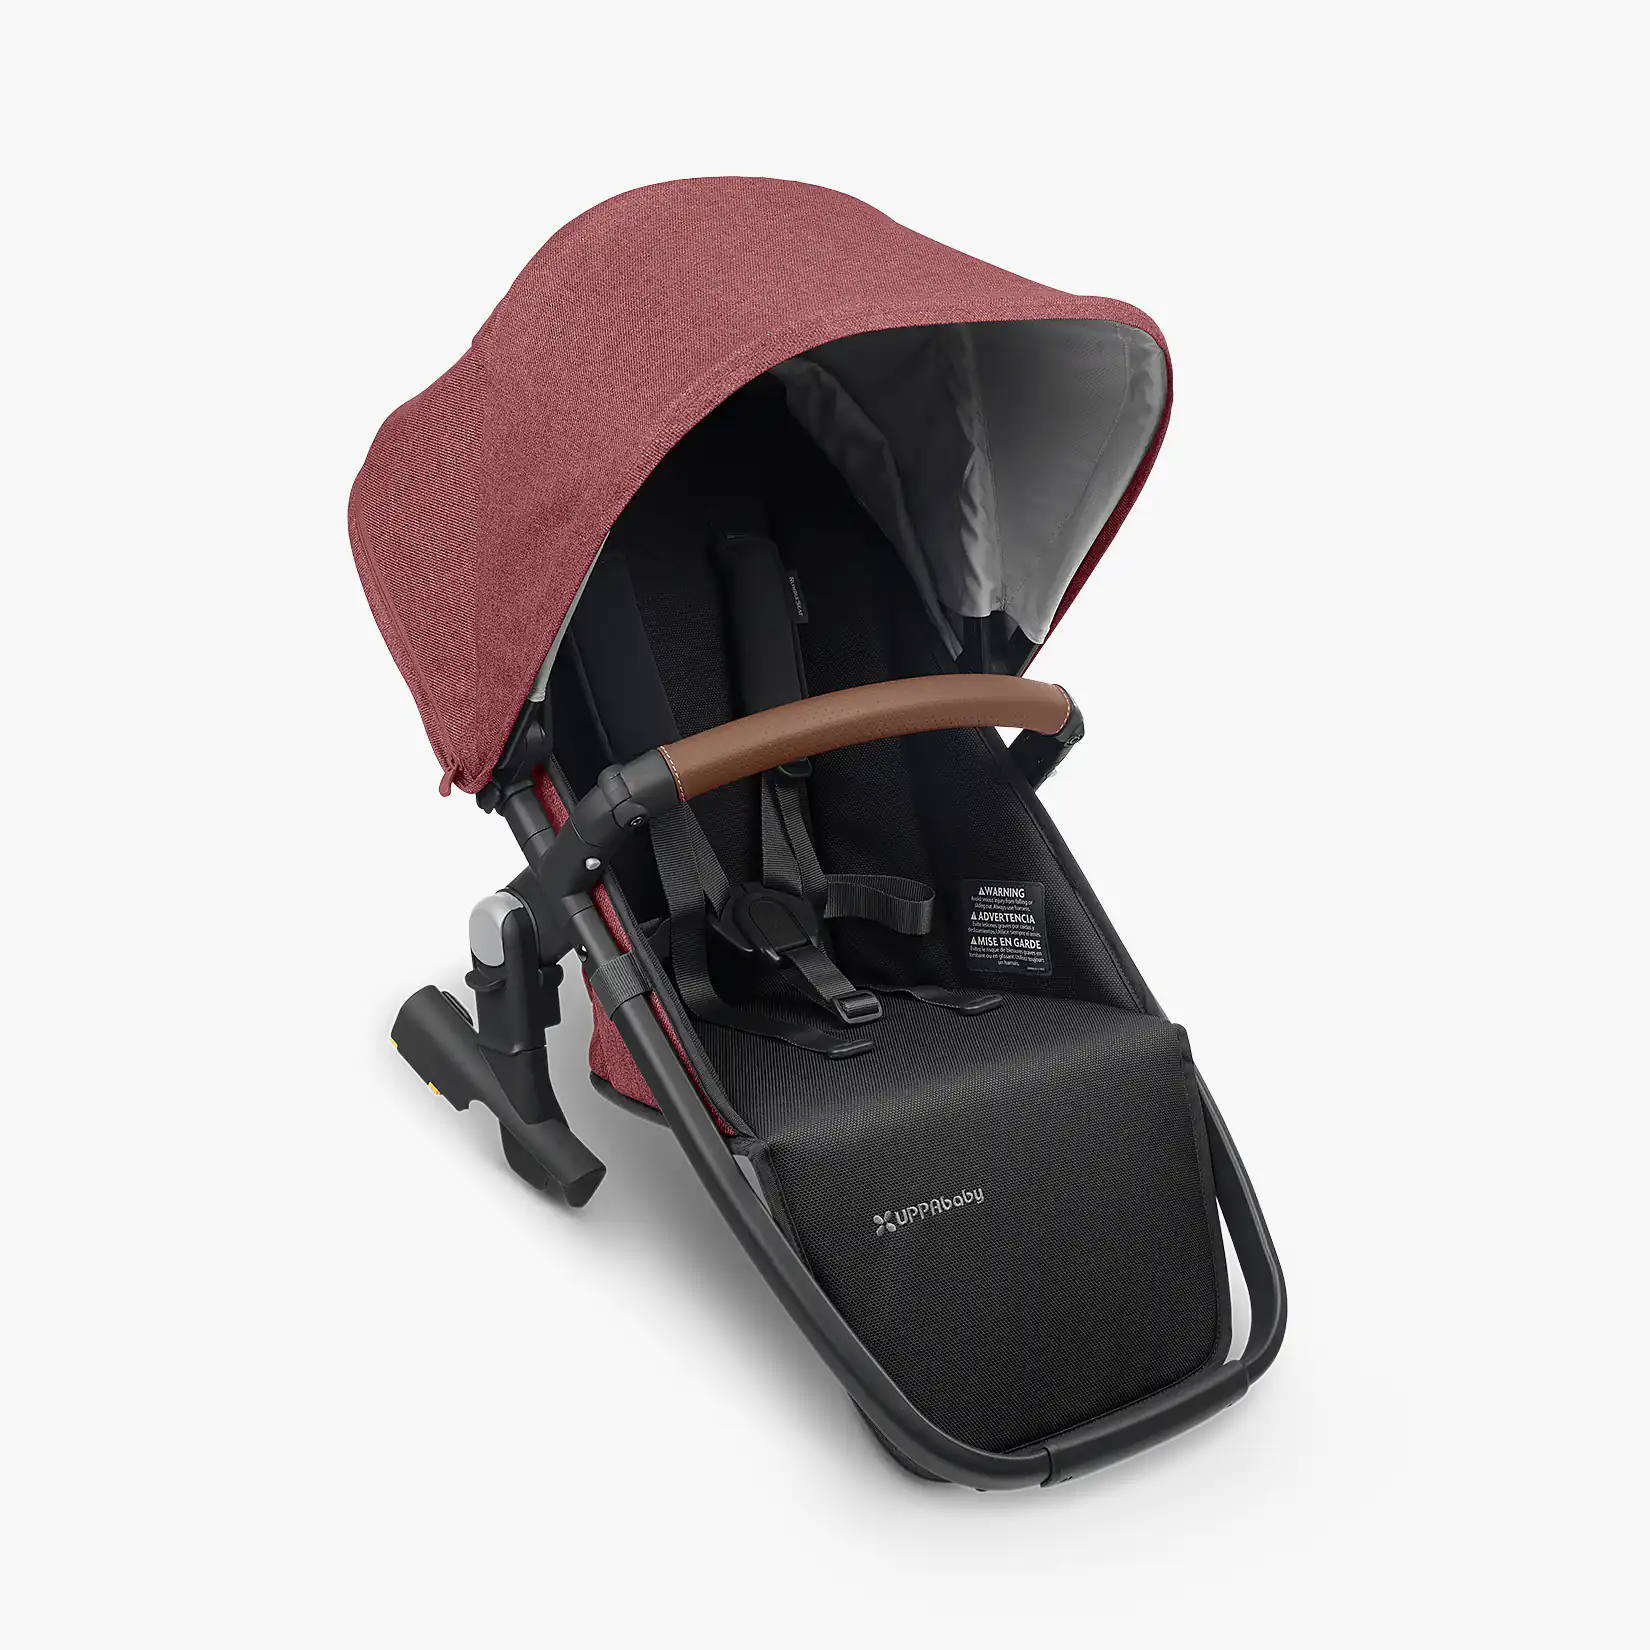 UPPAbaby RumbleSeat V2 Featured Image --ANB Baby